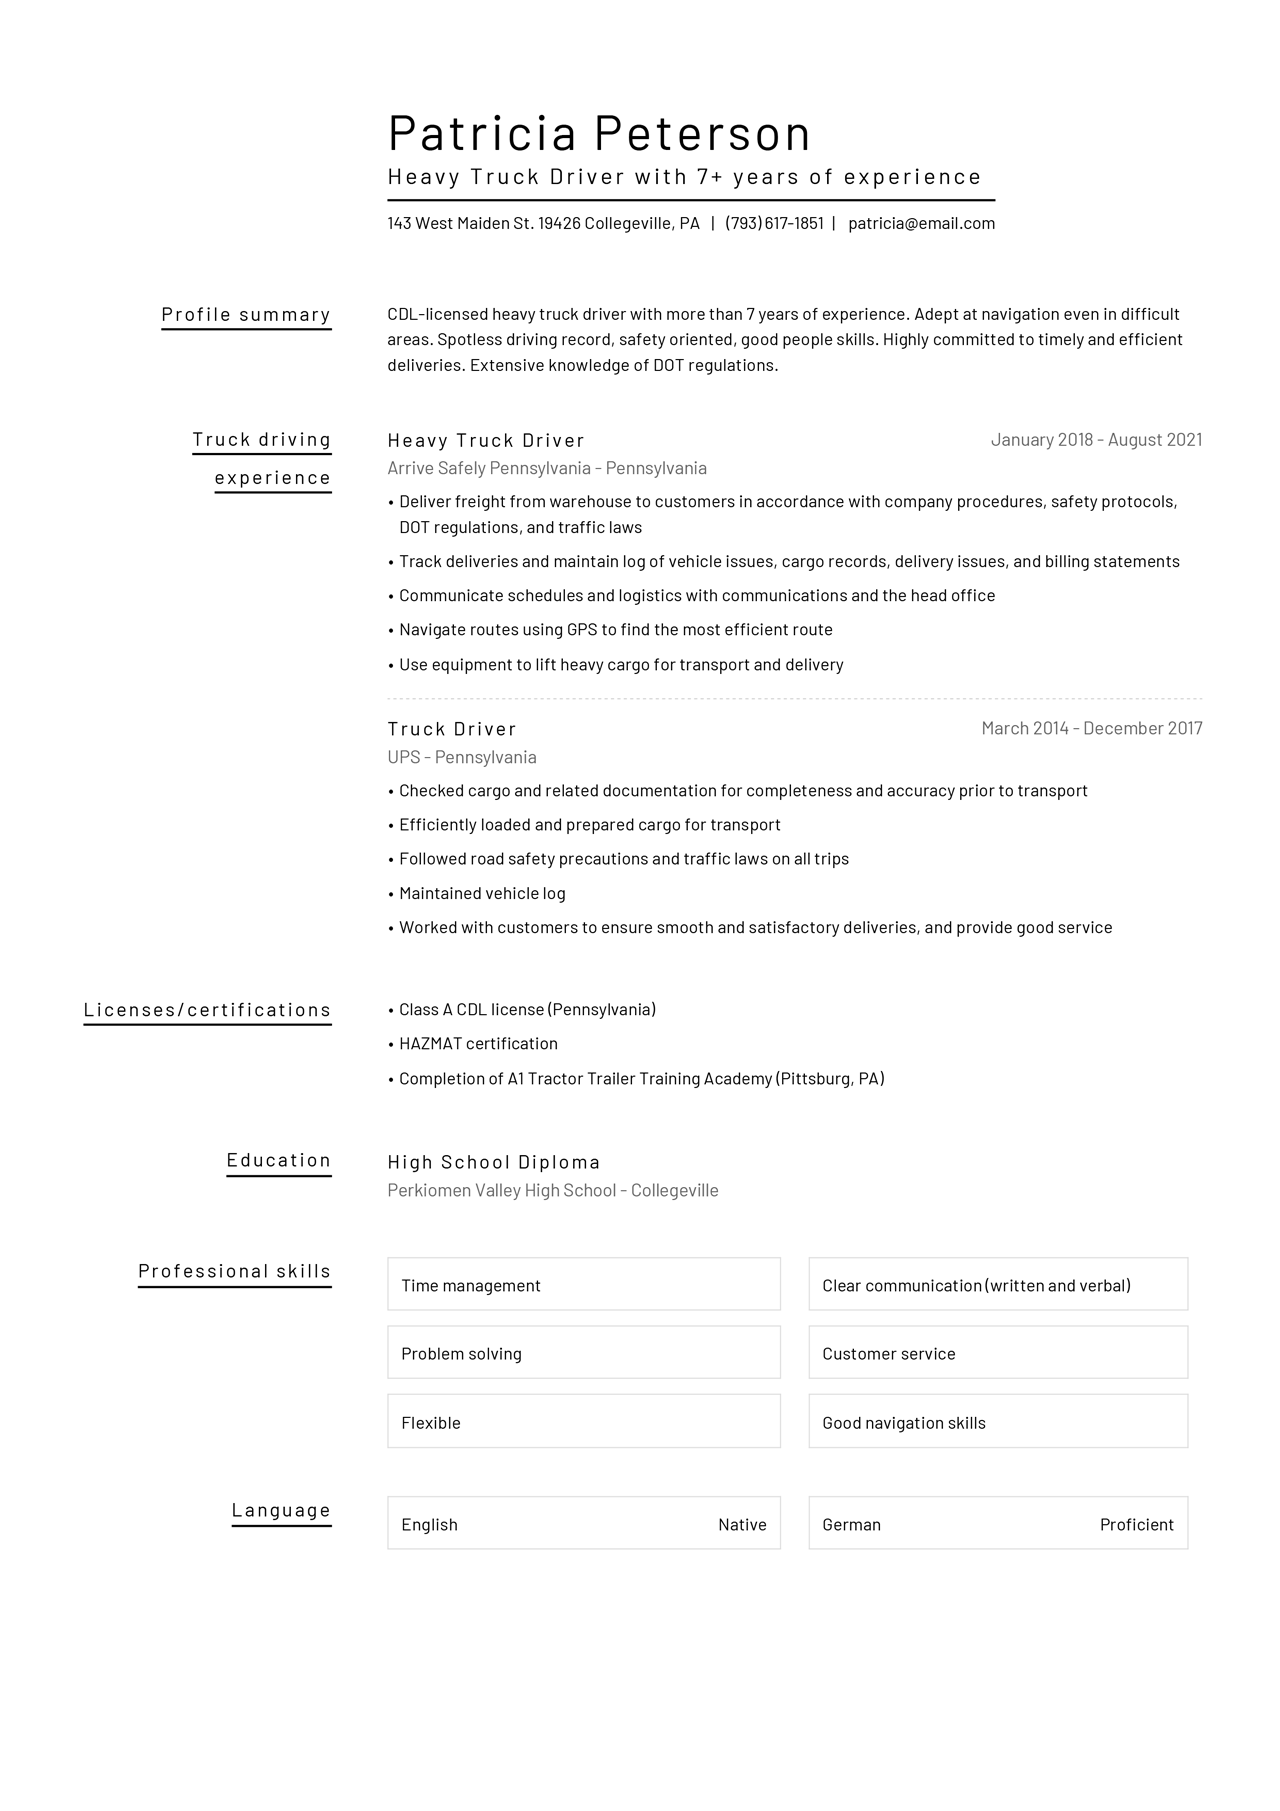 Truck driver resume example for a truck driver with more than 7 years of experience